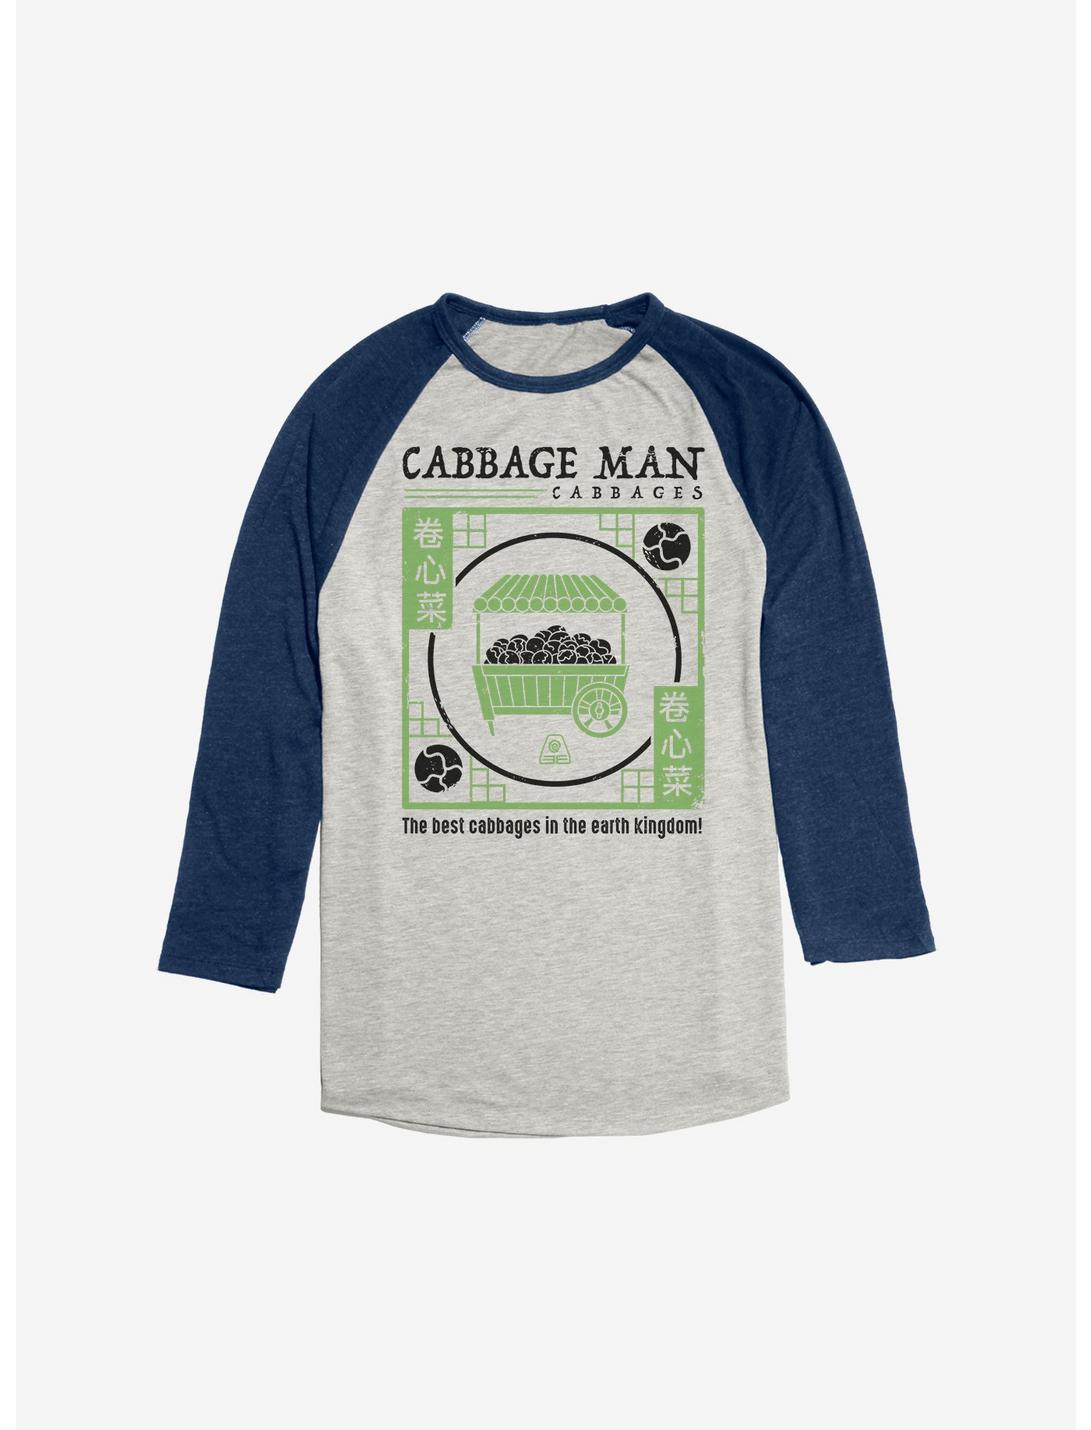 Avatar: The Last Airbender The Best Cabbages Raglan, Oatmeal With Navy, hi-res